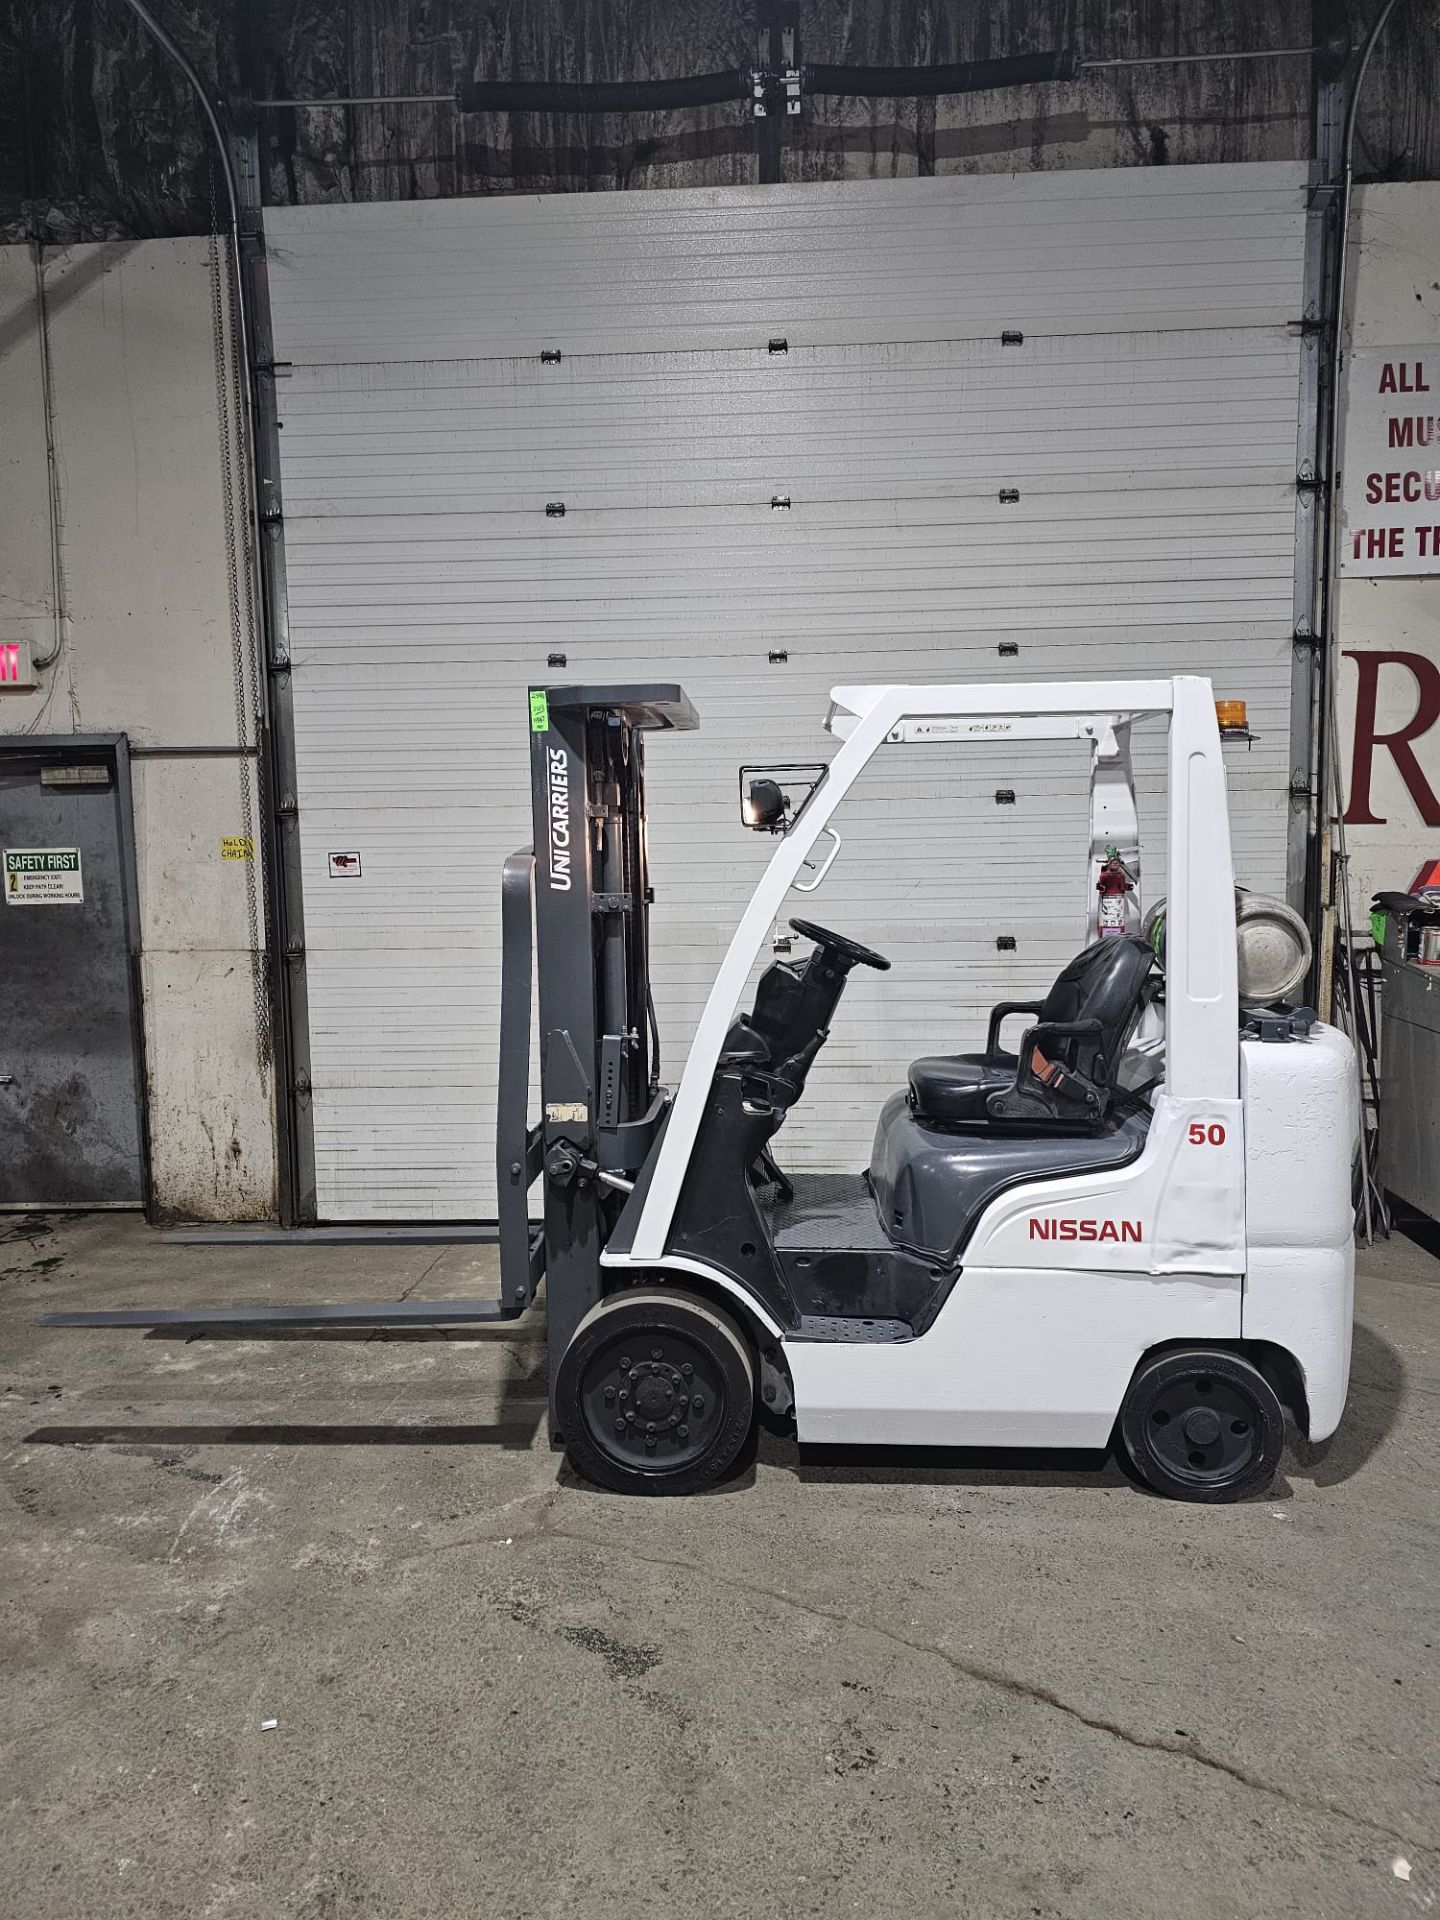 2013 Nissan 5000lbs Capacity LPG (Propane) forklift INDOOR 3-STAGE MAST with (no propane tank